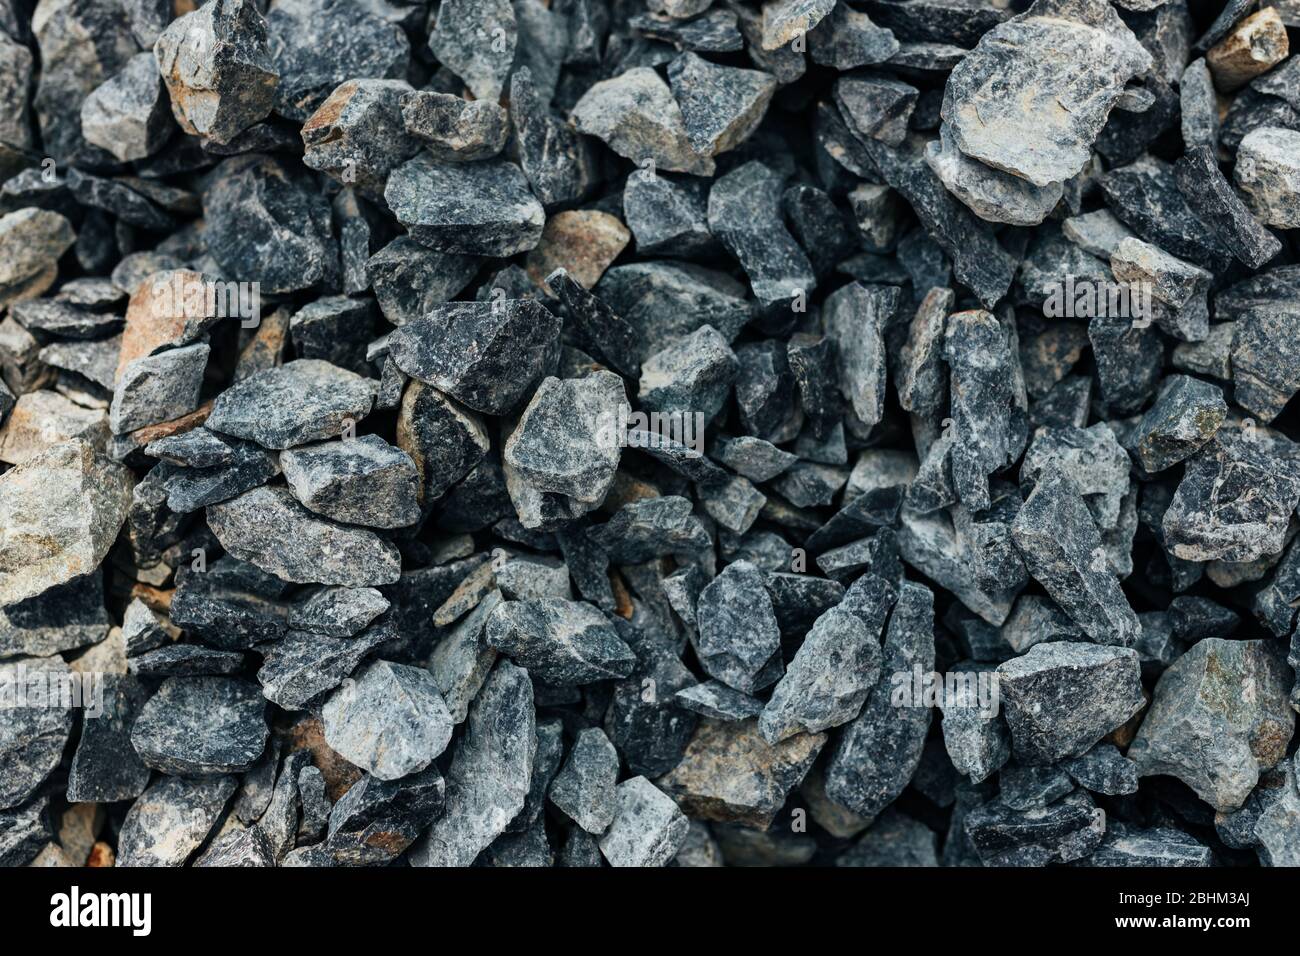 Rough stones, crushed stone, granite gravel close-up. The rough texture of the stone. Building material background. Texture Stock Photo